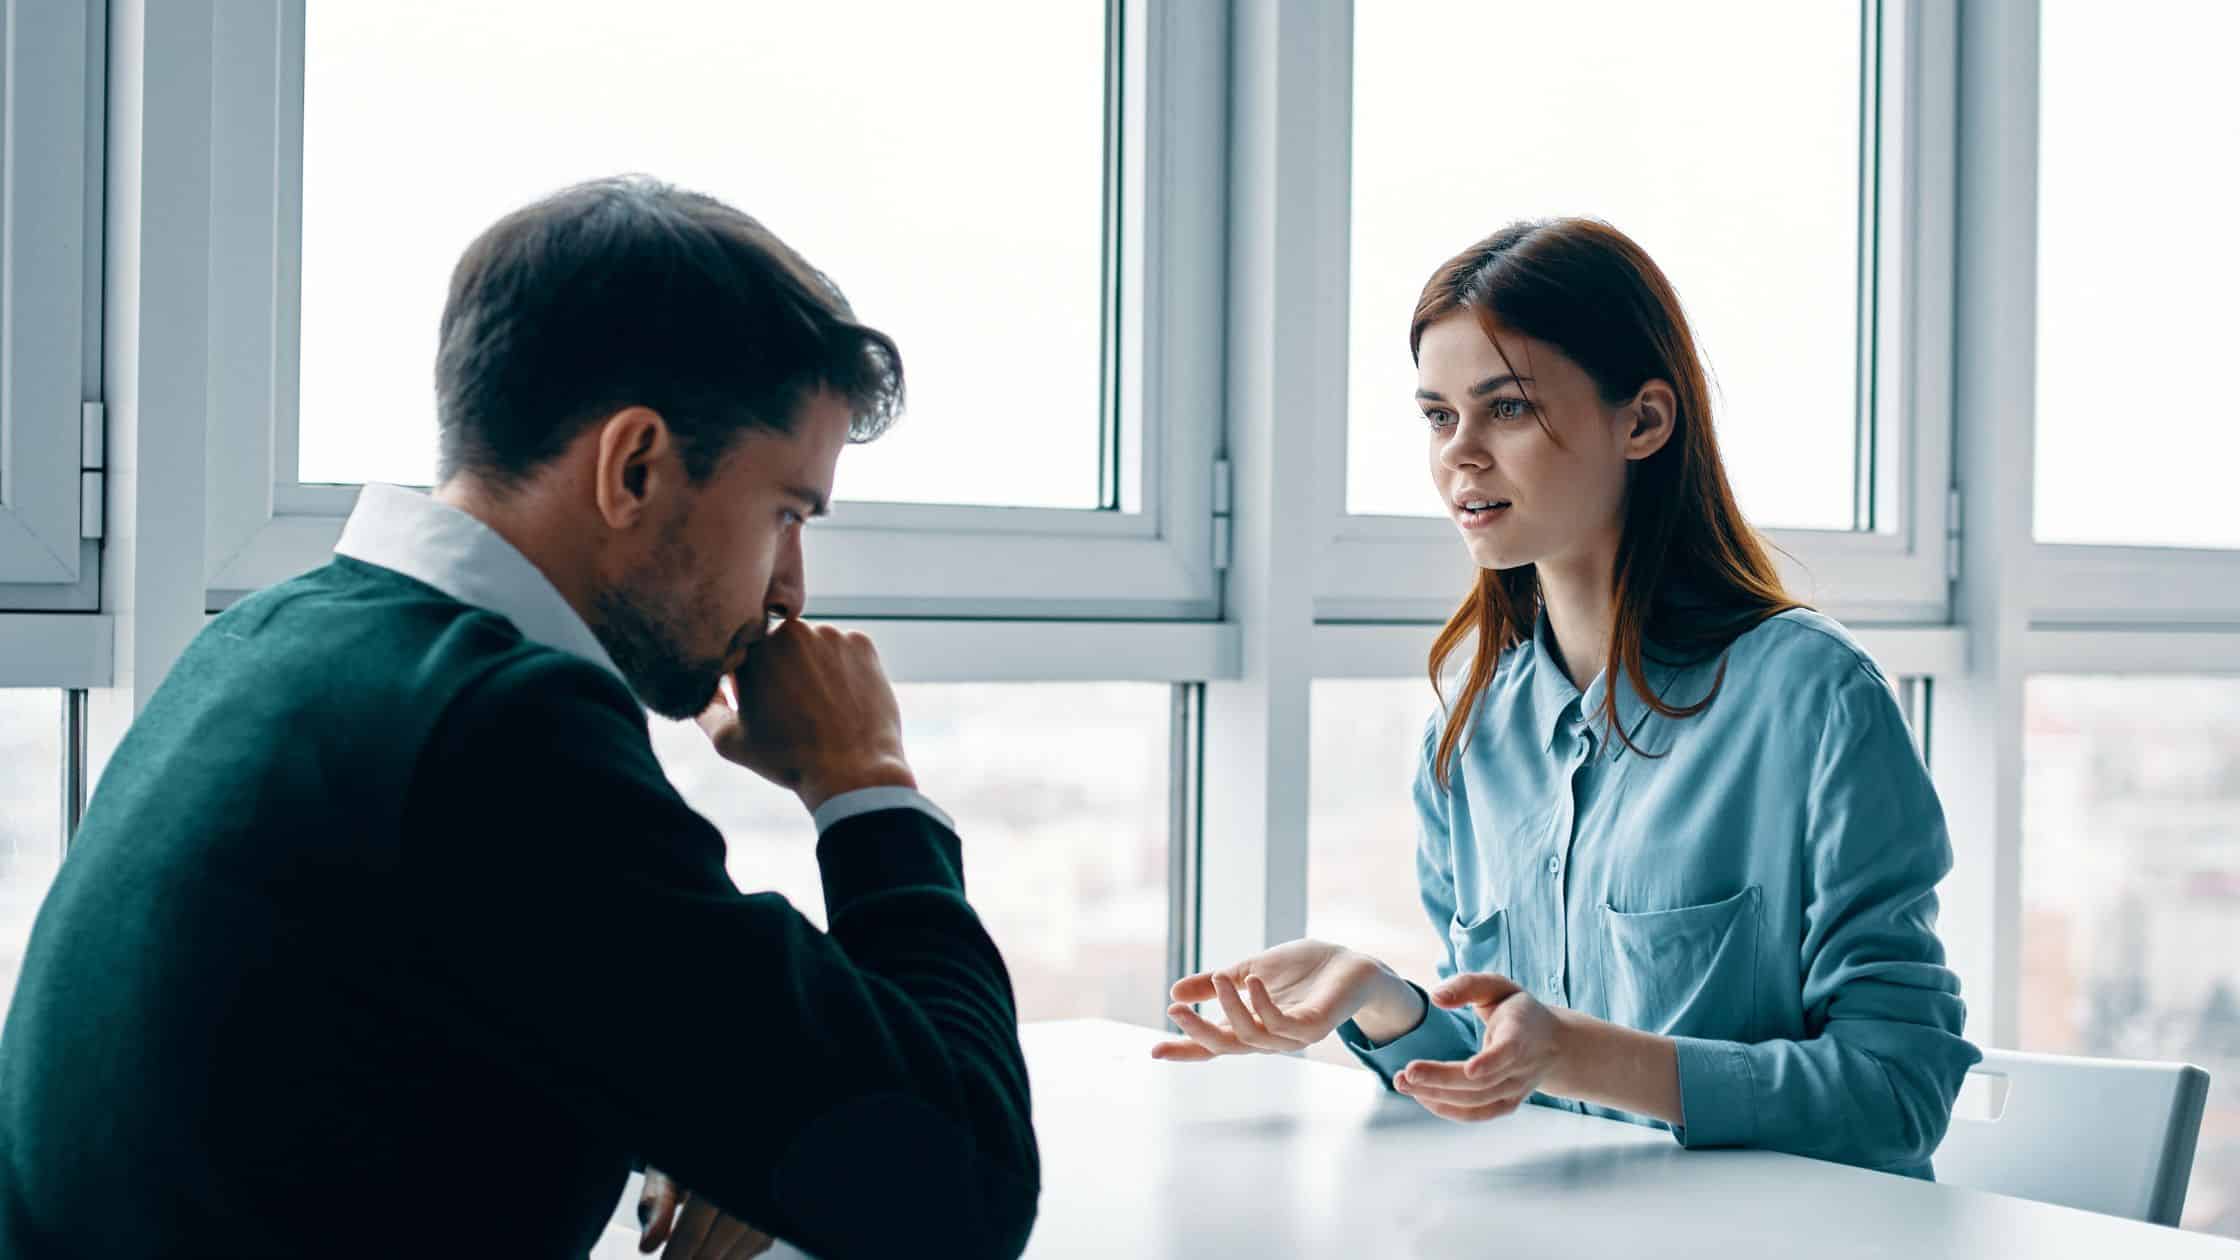 How to communicate to your boss that they are failing you as a leader. Knowing how to tell your boss that they are underperforming can be a difficult but necessary conversation to have. How to approach your boss when they are failing you.